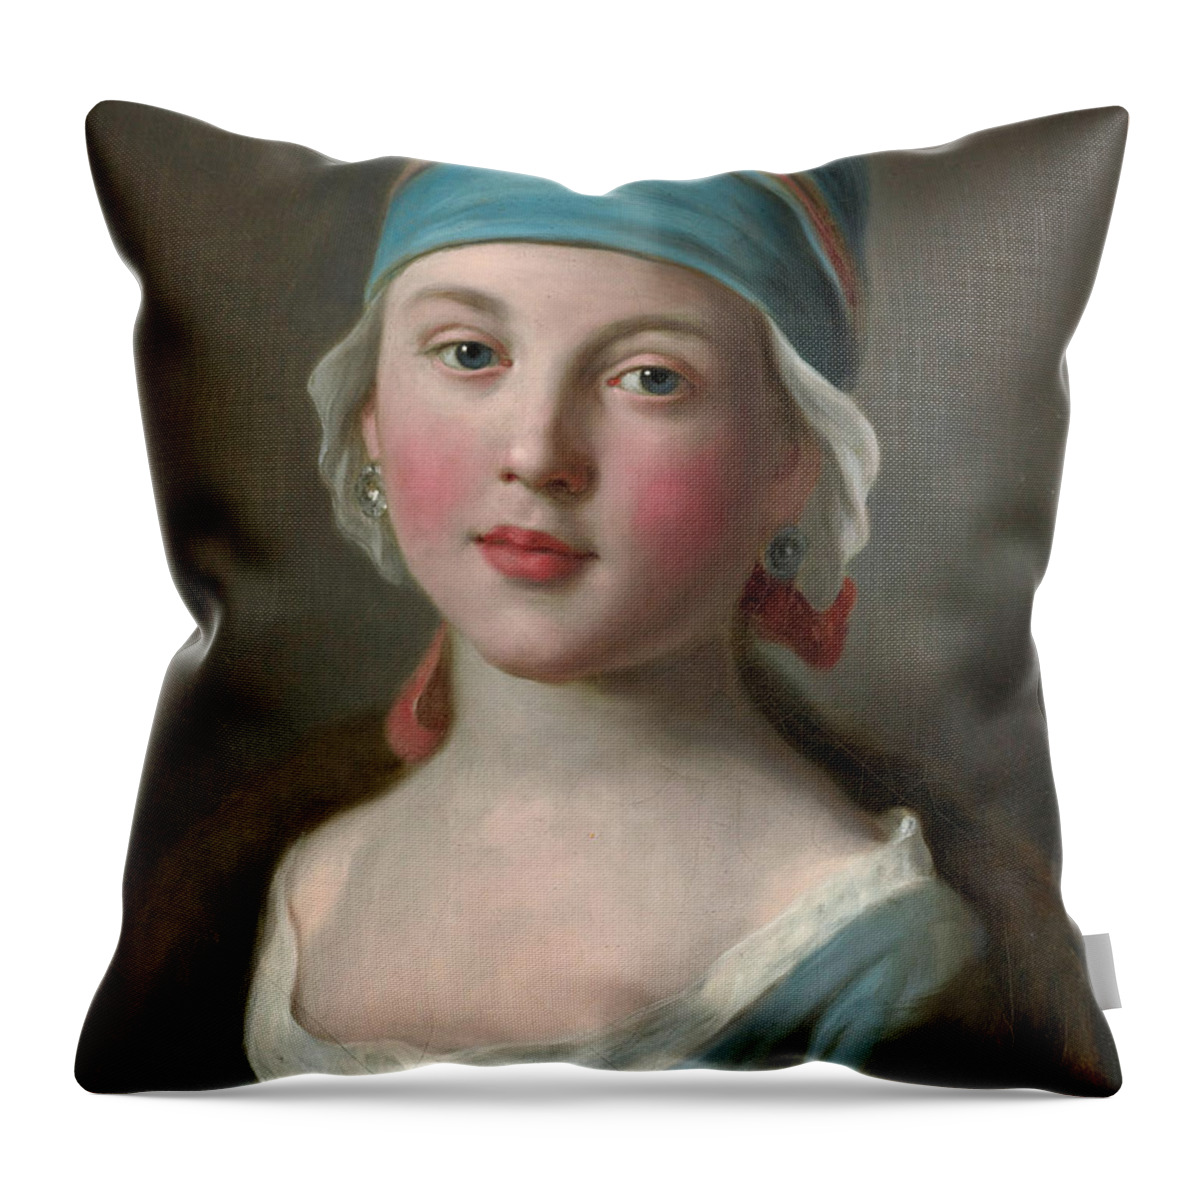 Portrait Of A Russian Girl In A Blue Dress And Headdress Throw Pillow featuring the painting Portrait of a Russian Girl in a Blue Dress and Headdress by Pietro Rotari